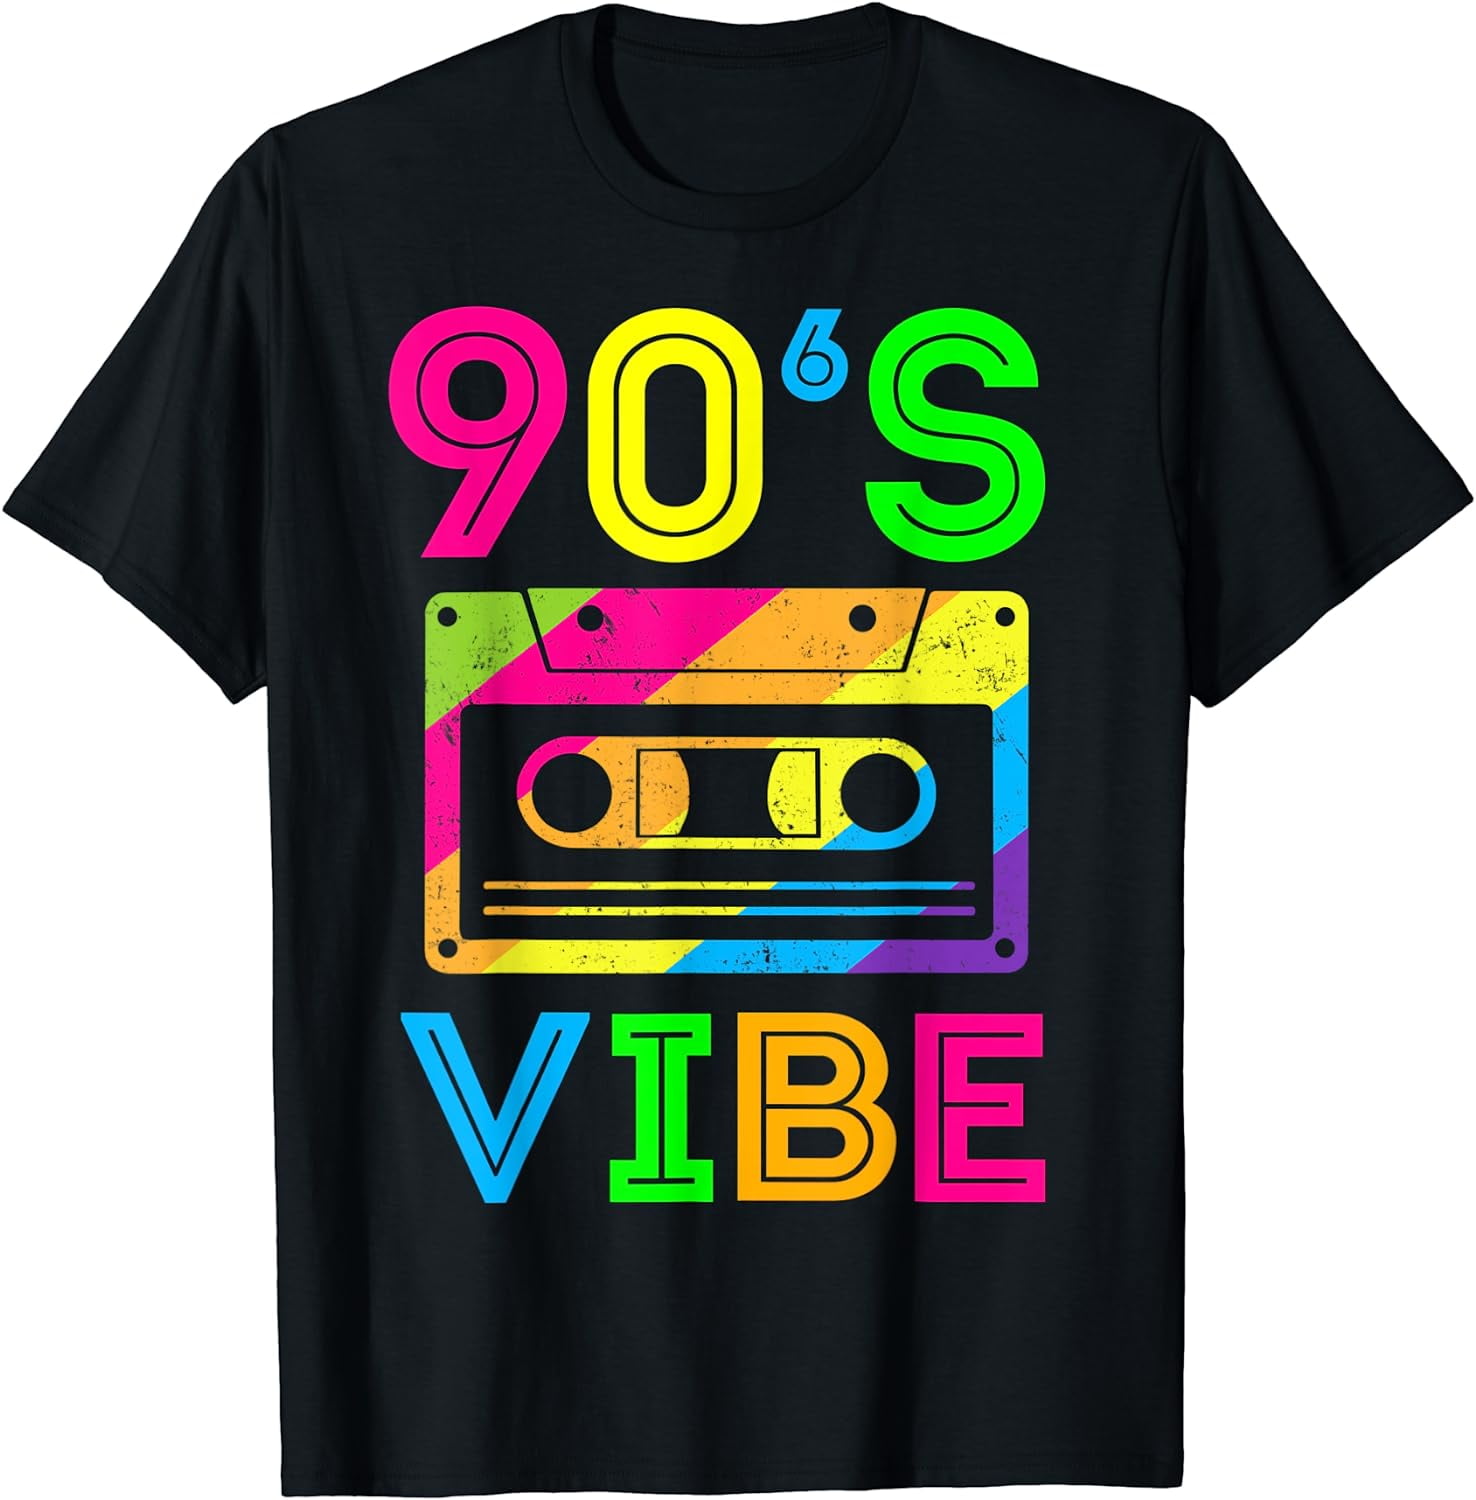 Retro aesthetic costume party outfit - 90s vibe T-Shirt - Walmart.com